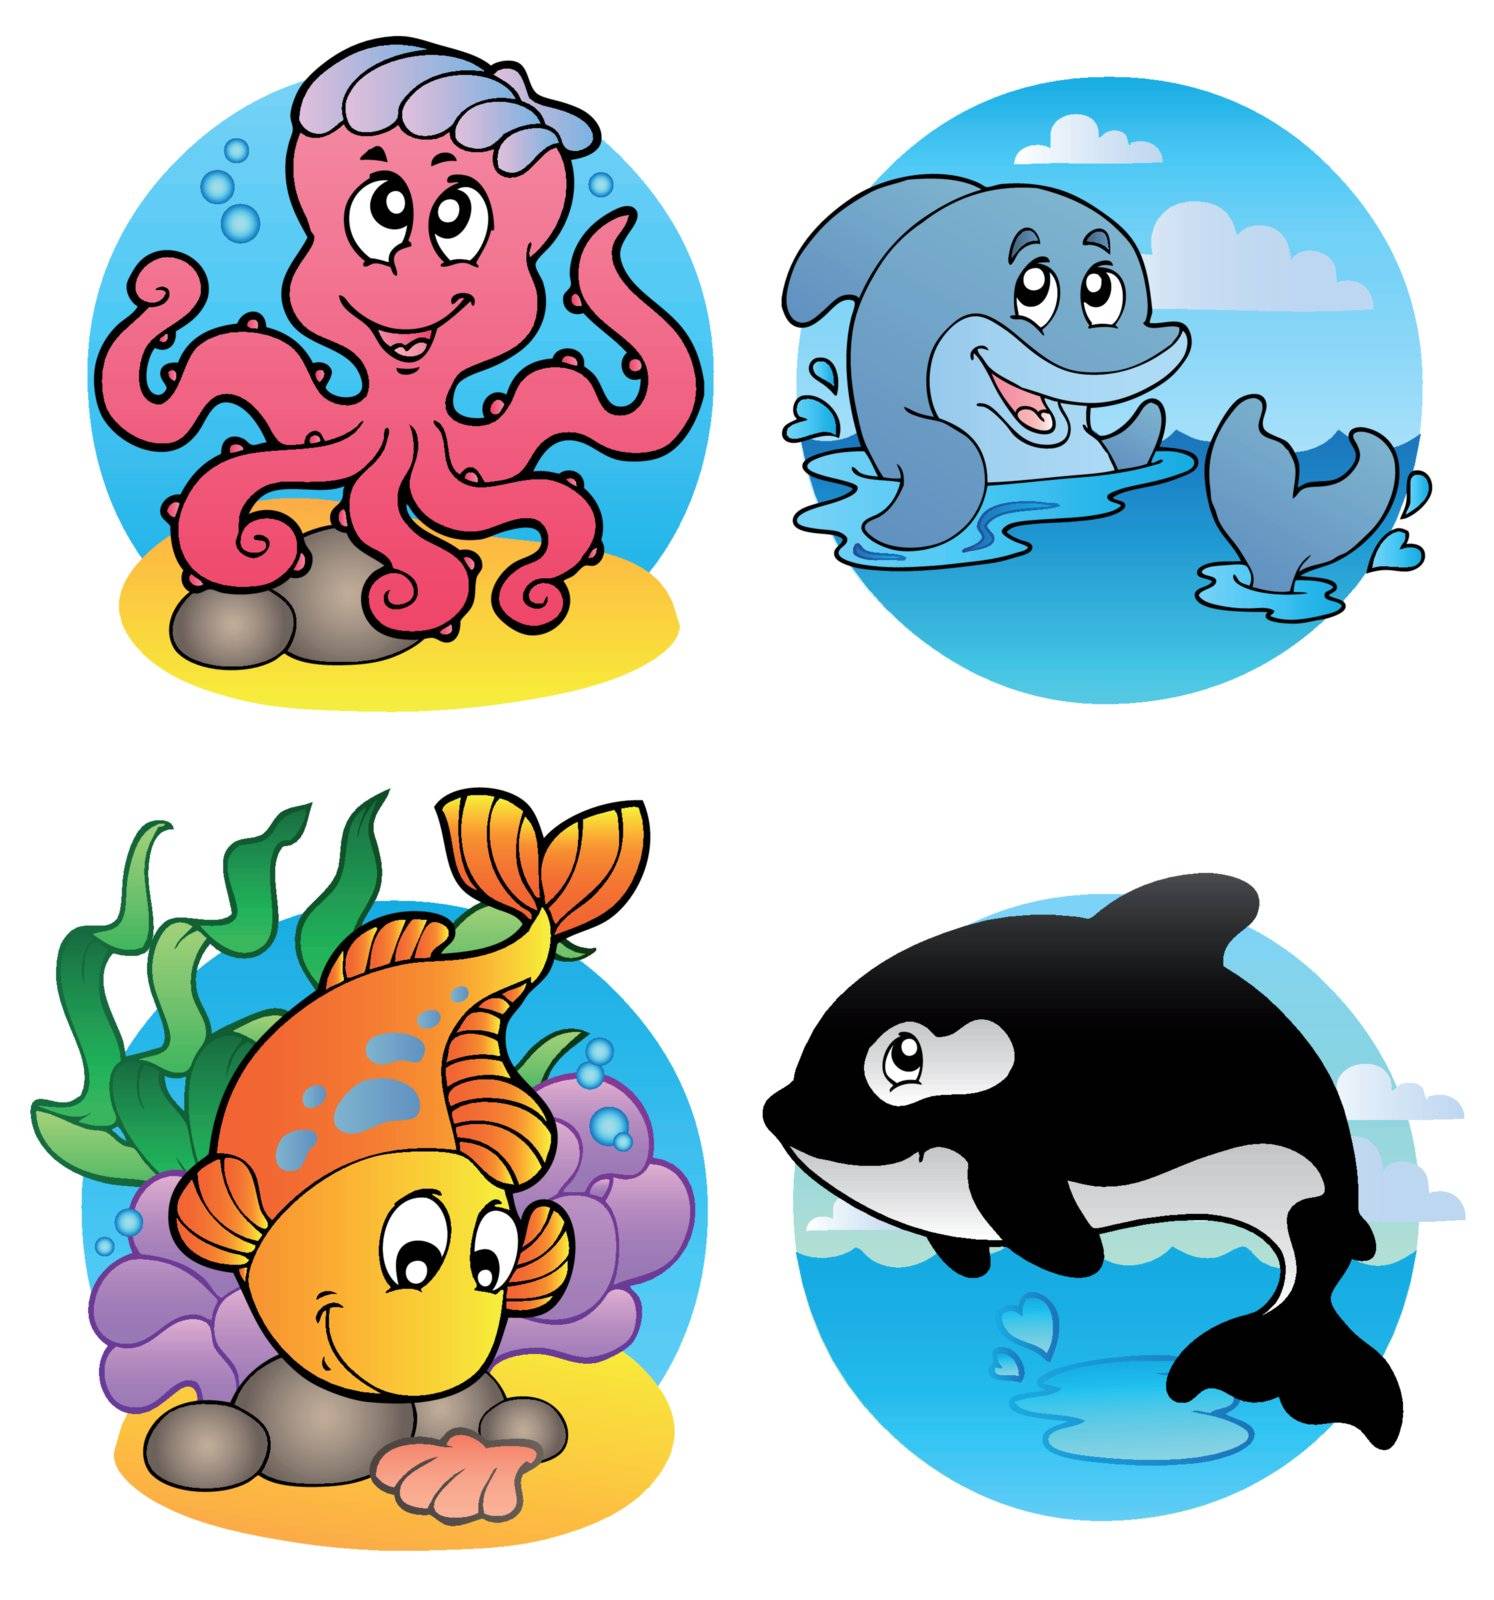 Various aquatic animals and fishes - vector illustration.